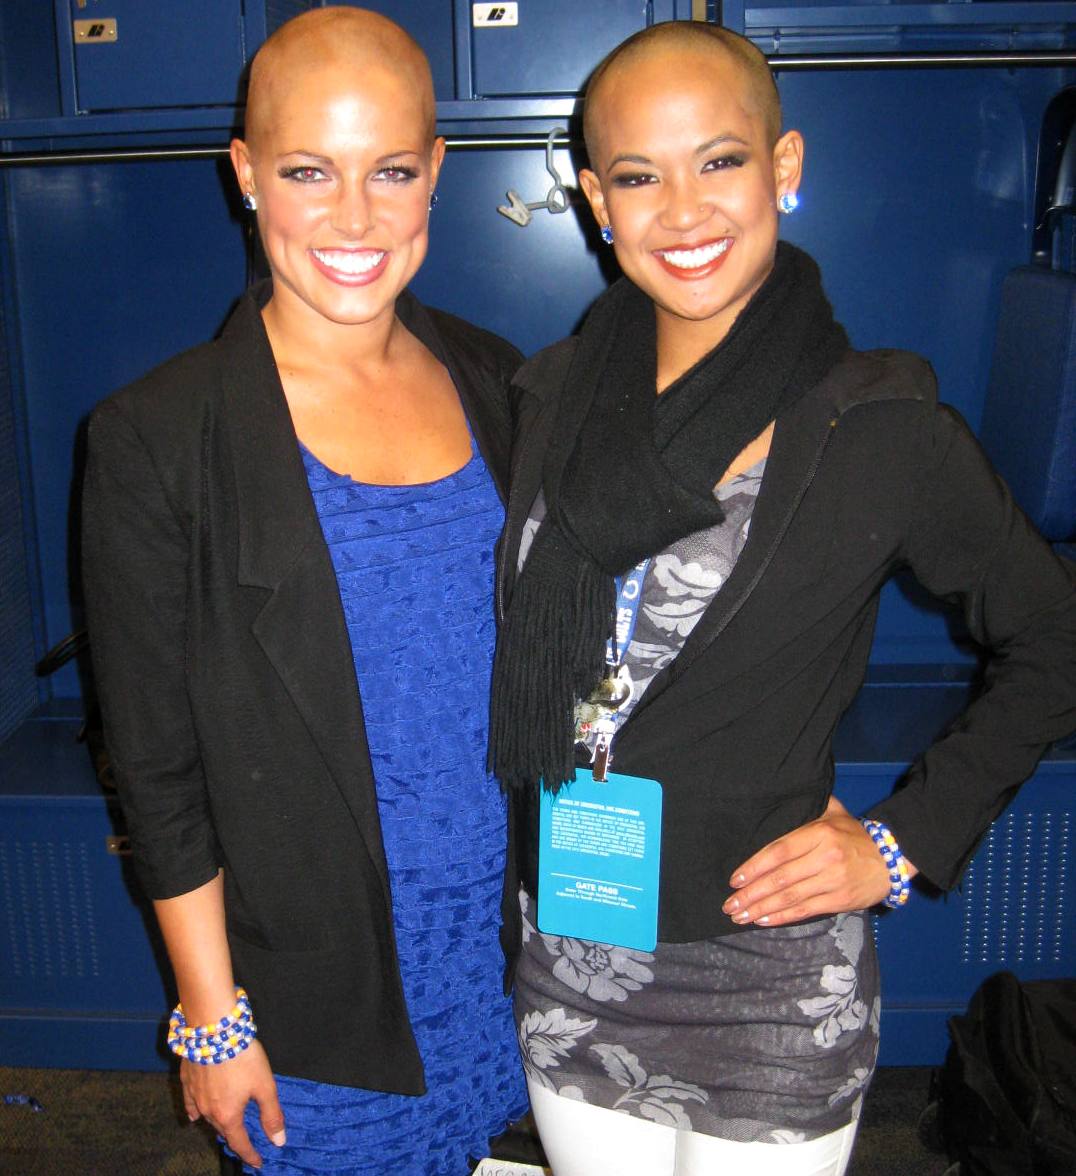 Indianapolis Colts Cheerleaders pose with newly shaved heads